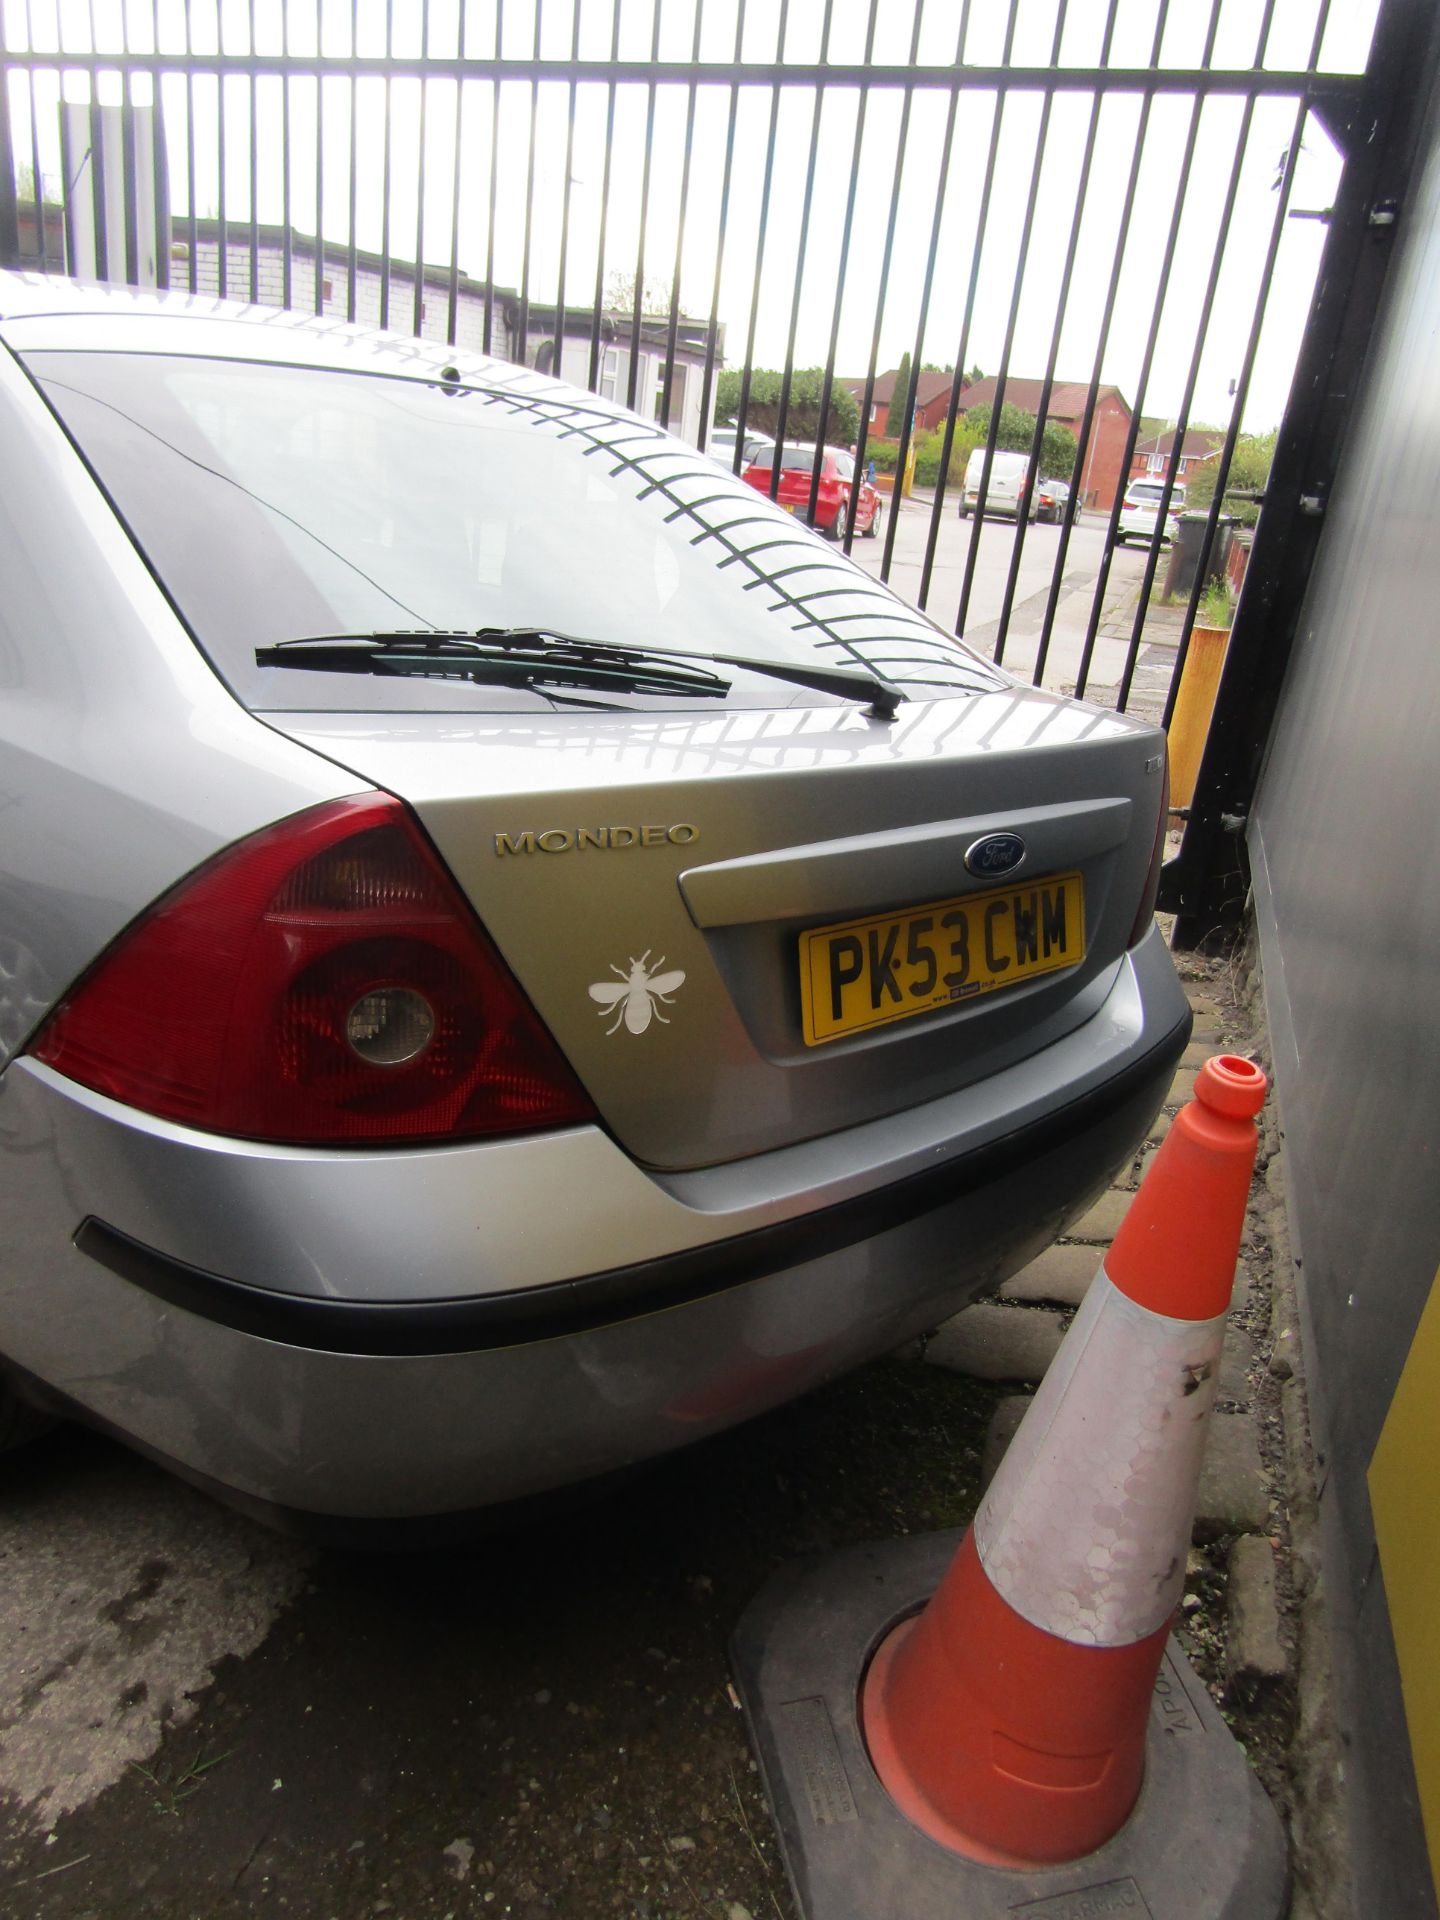 2003 Ford Mondeo Graphite 2.0 TDCI, MOT until 13th September, 89,010 miles (unchecked) comes with - Bild 3 aus 10